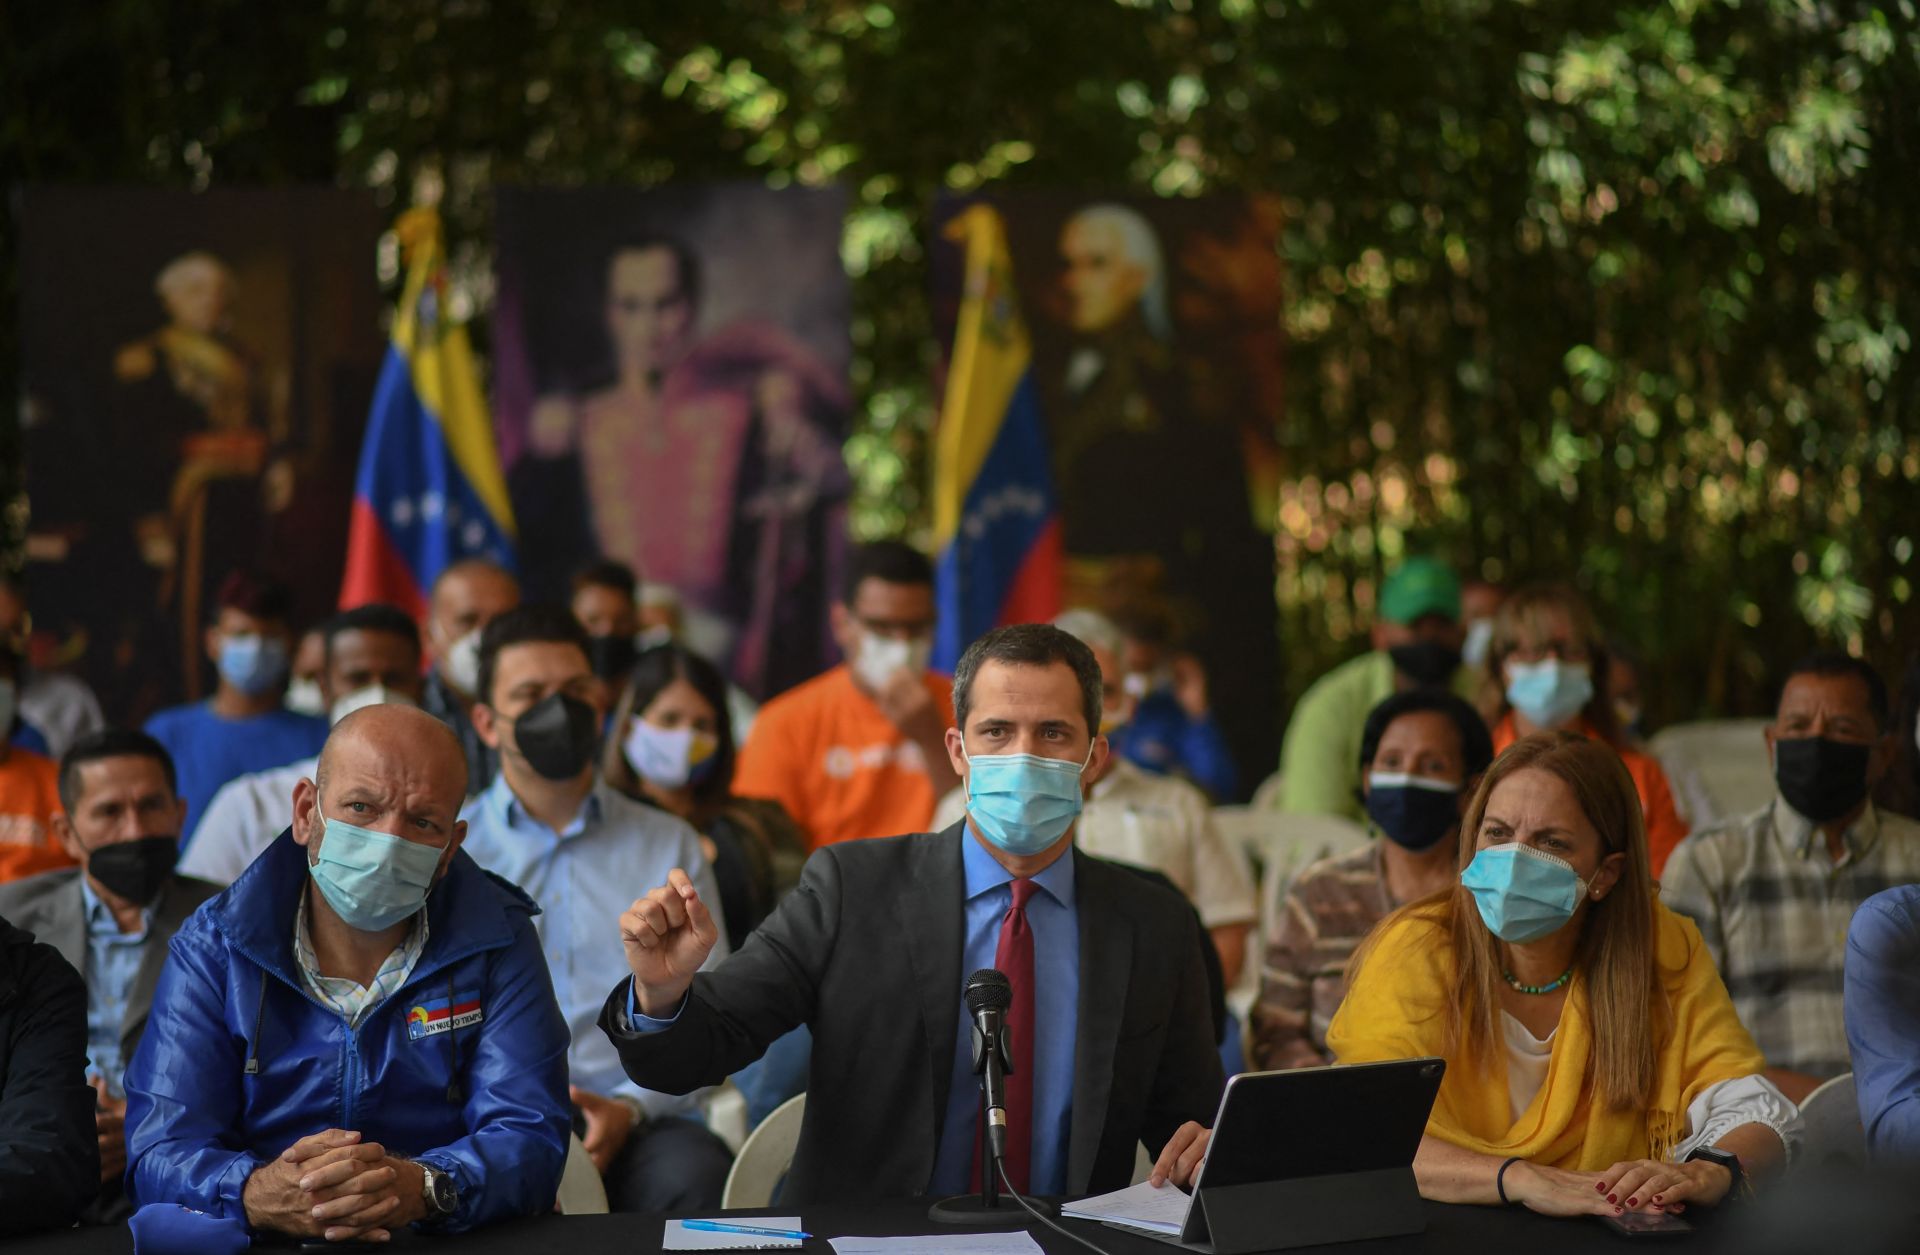 Venezuelan opposition leader Juan Guaido (center) speaks during a press conference at a park in Caracas on June 30, 2021. 